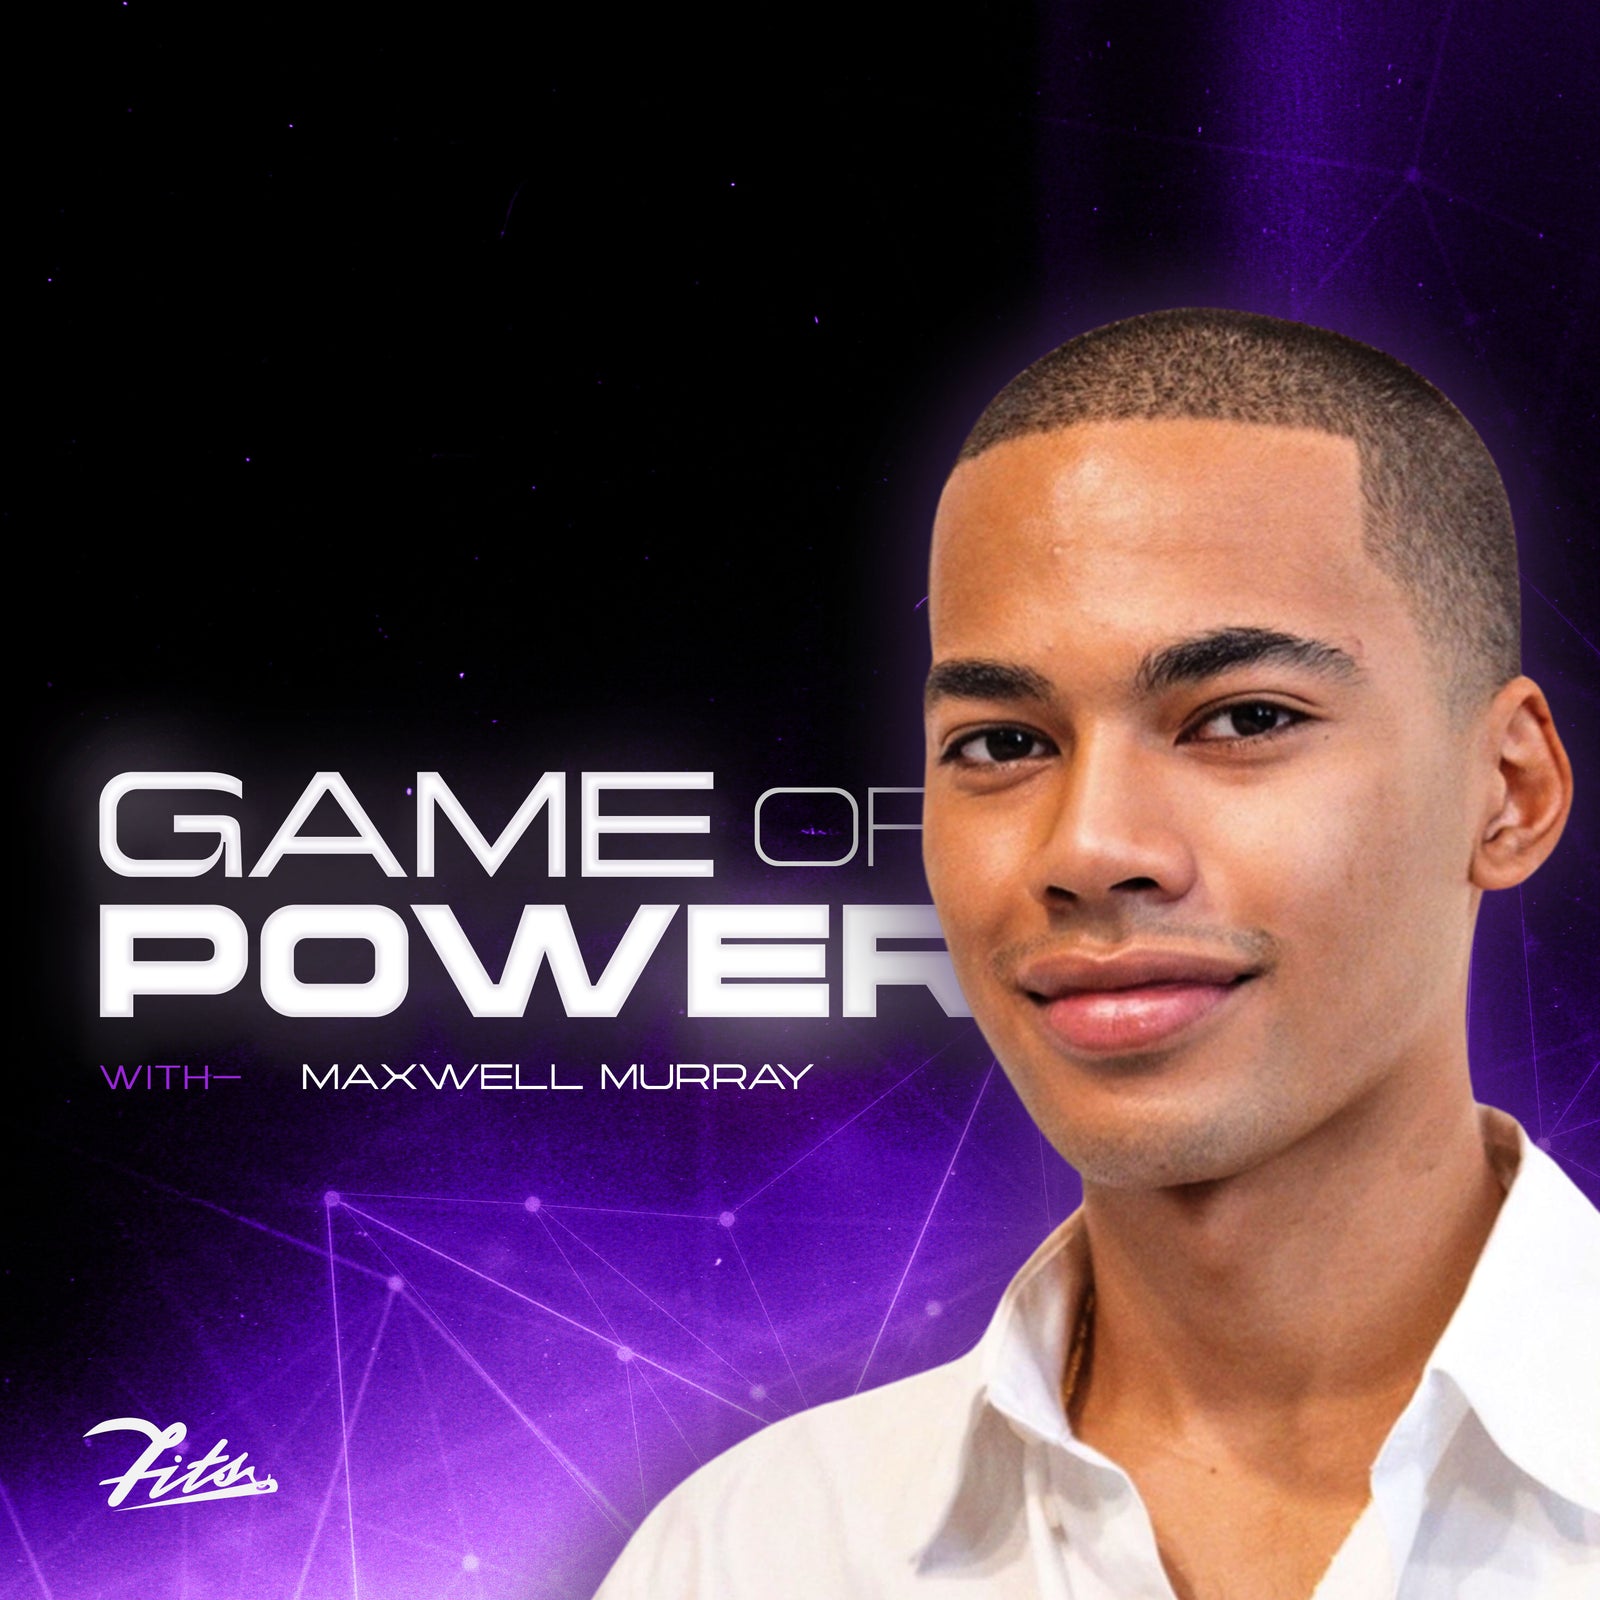 game of power, podcast, flyer, fits, maxwell murray